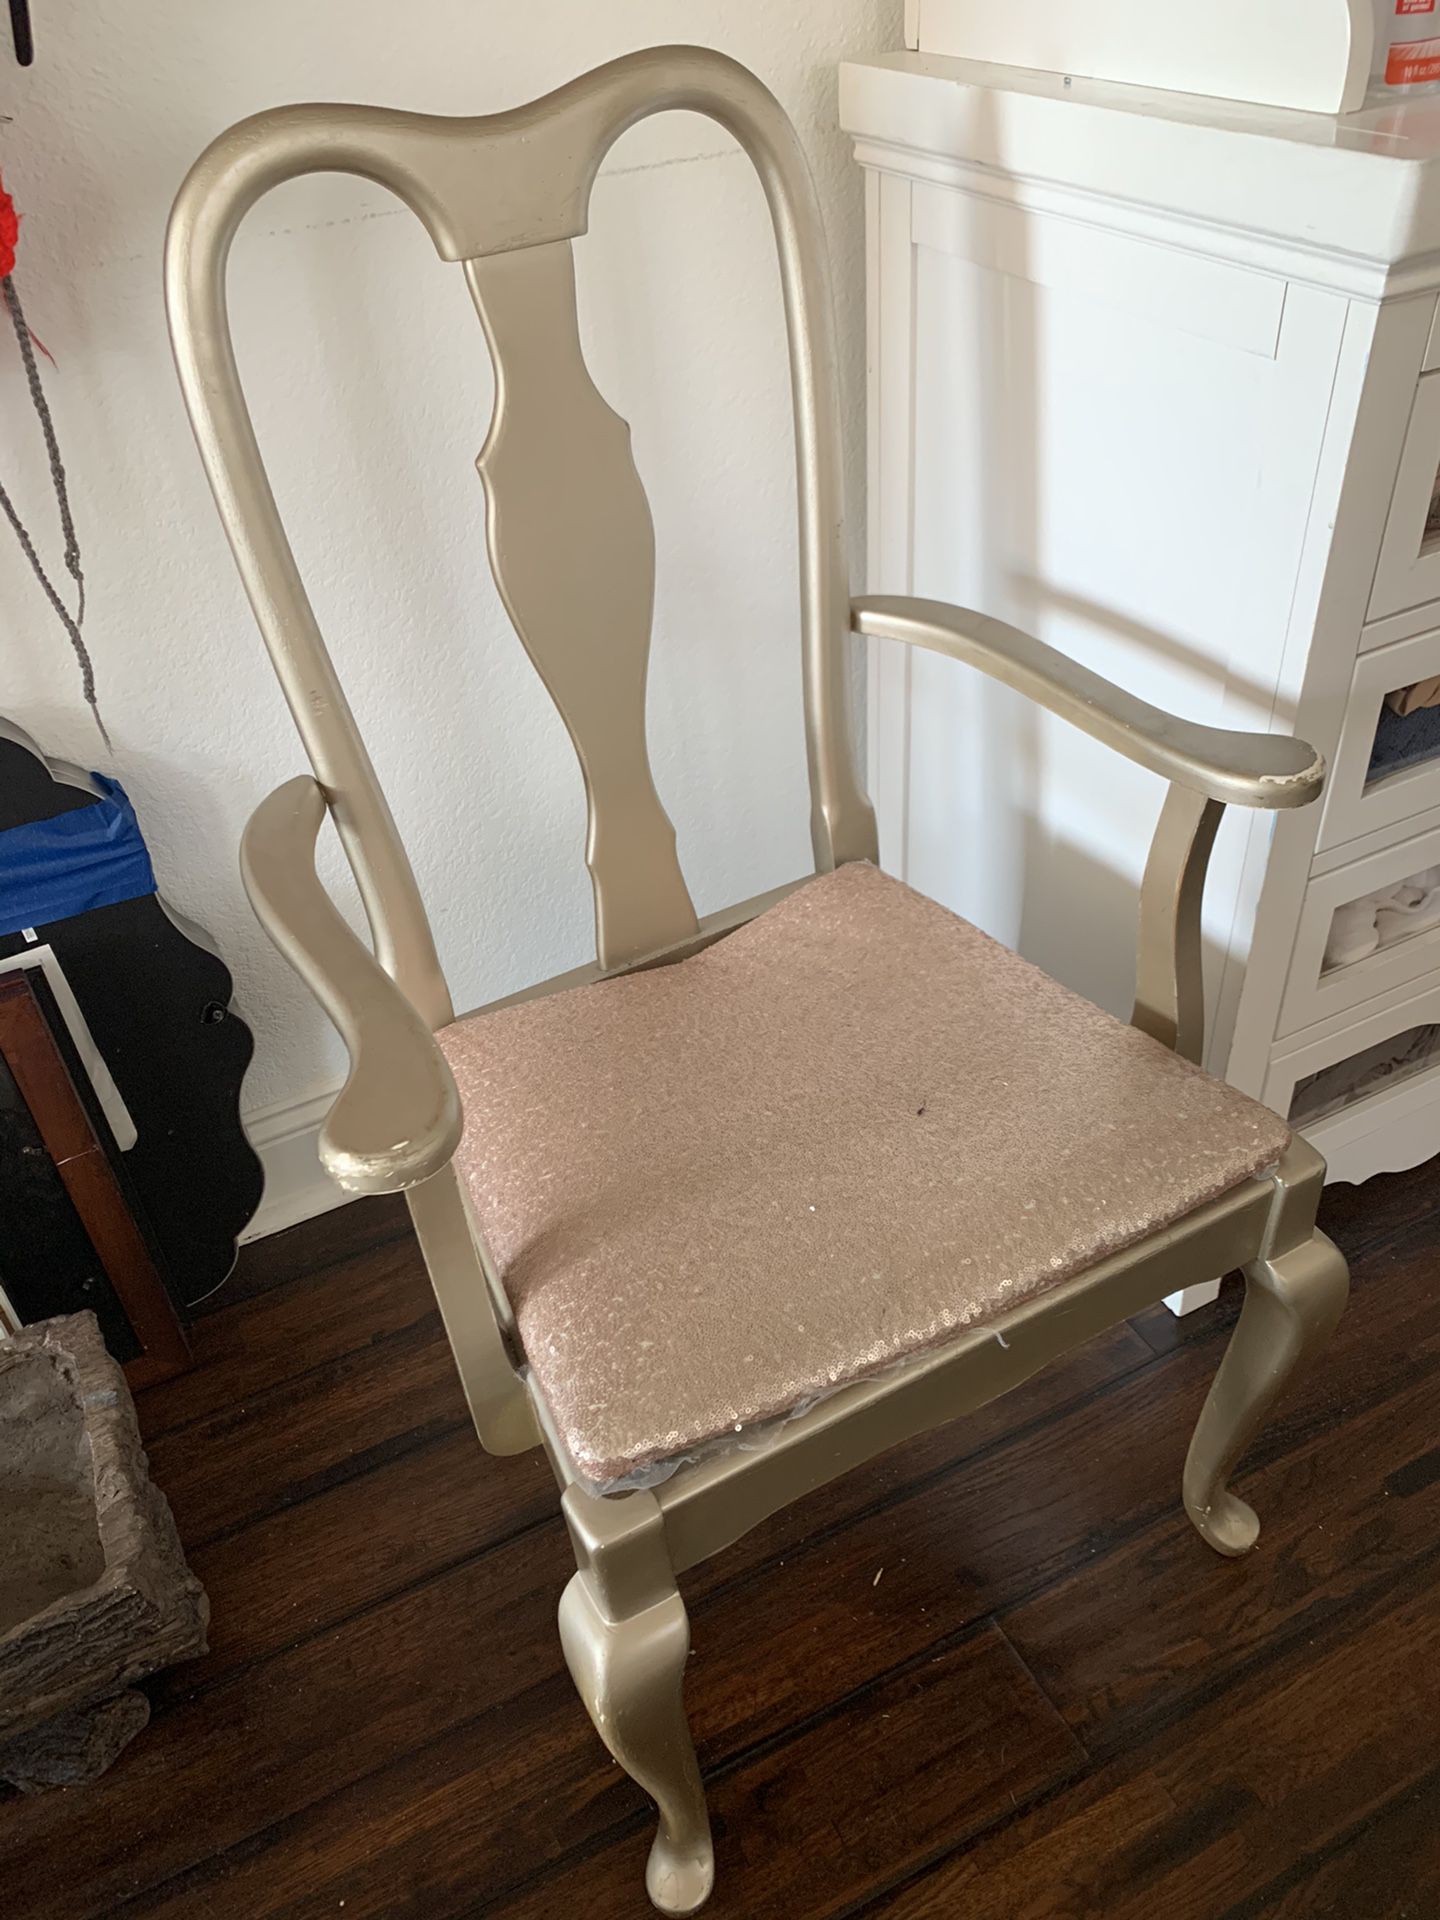 Free chair (champagne/rose gold) FREE